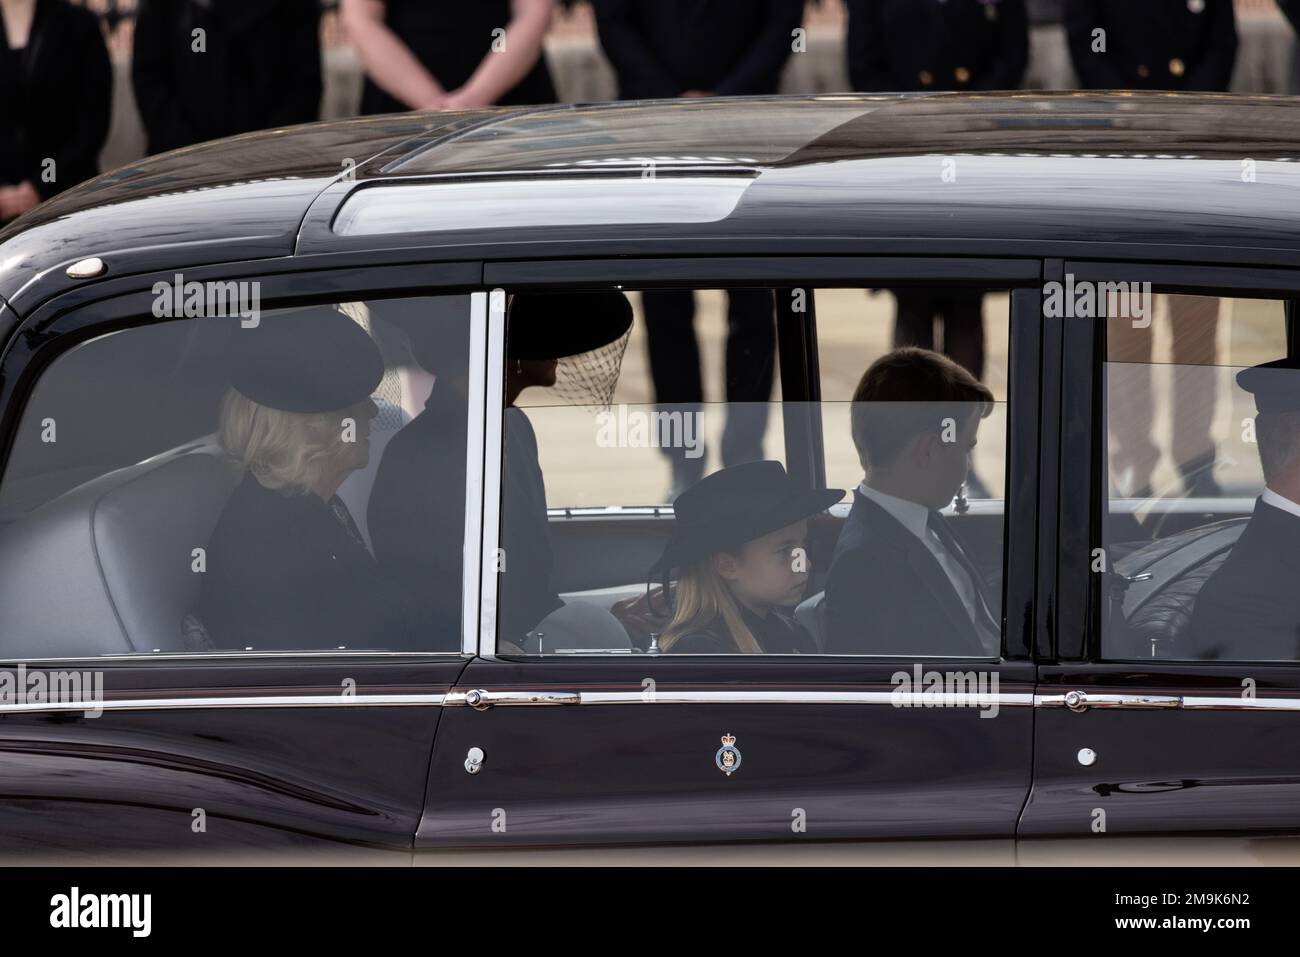 Prince George and Princess Charlotte, travelled by royal car with the their mother Princess of Wales, and Camilla, after the Queen's Funeral Service. Stock Photo